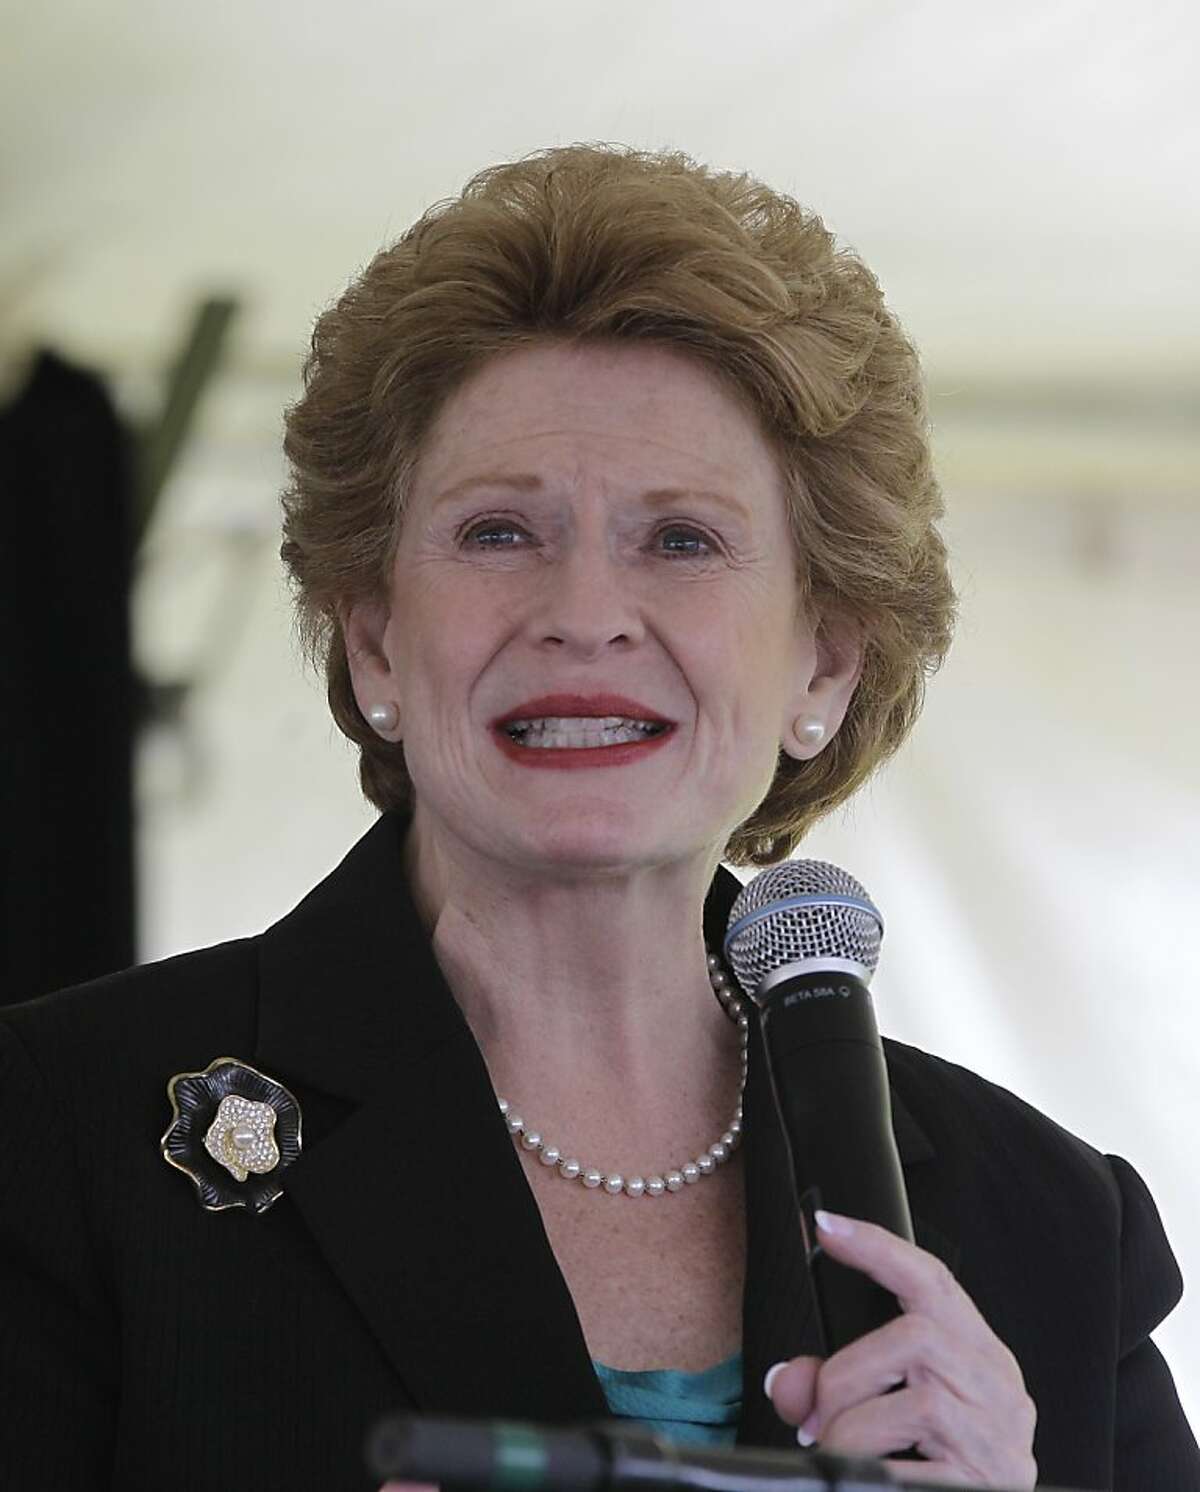 Sen. Debbie Stabenow, D-Mich., is seen before a ground breaking ceremony for the retailer in Detroit, Monday, May 14, 2012. (AP Photo/Carlos Osorio)